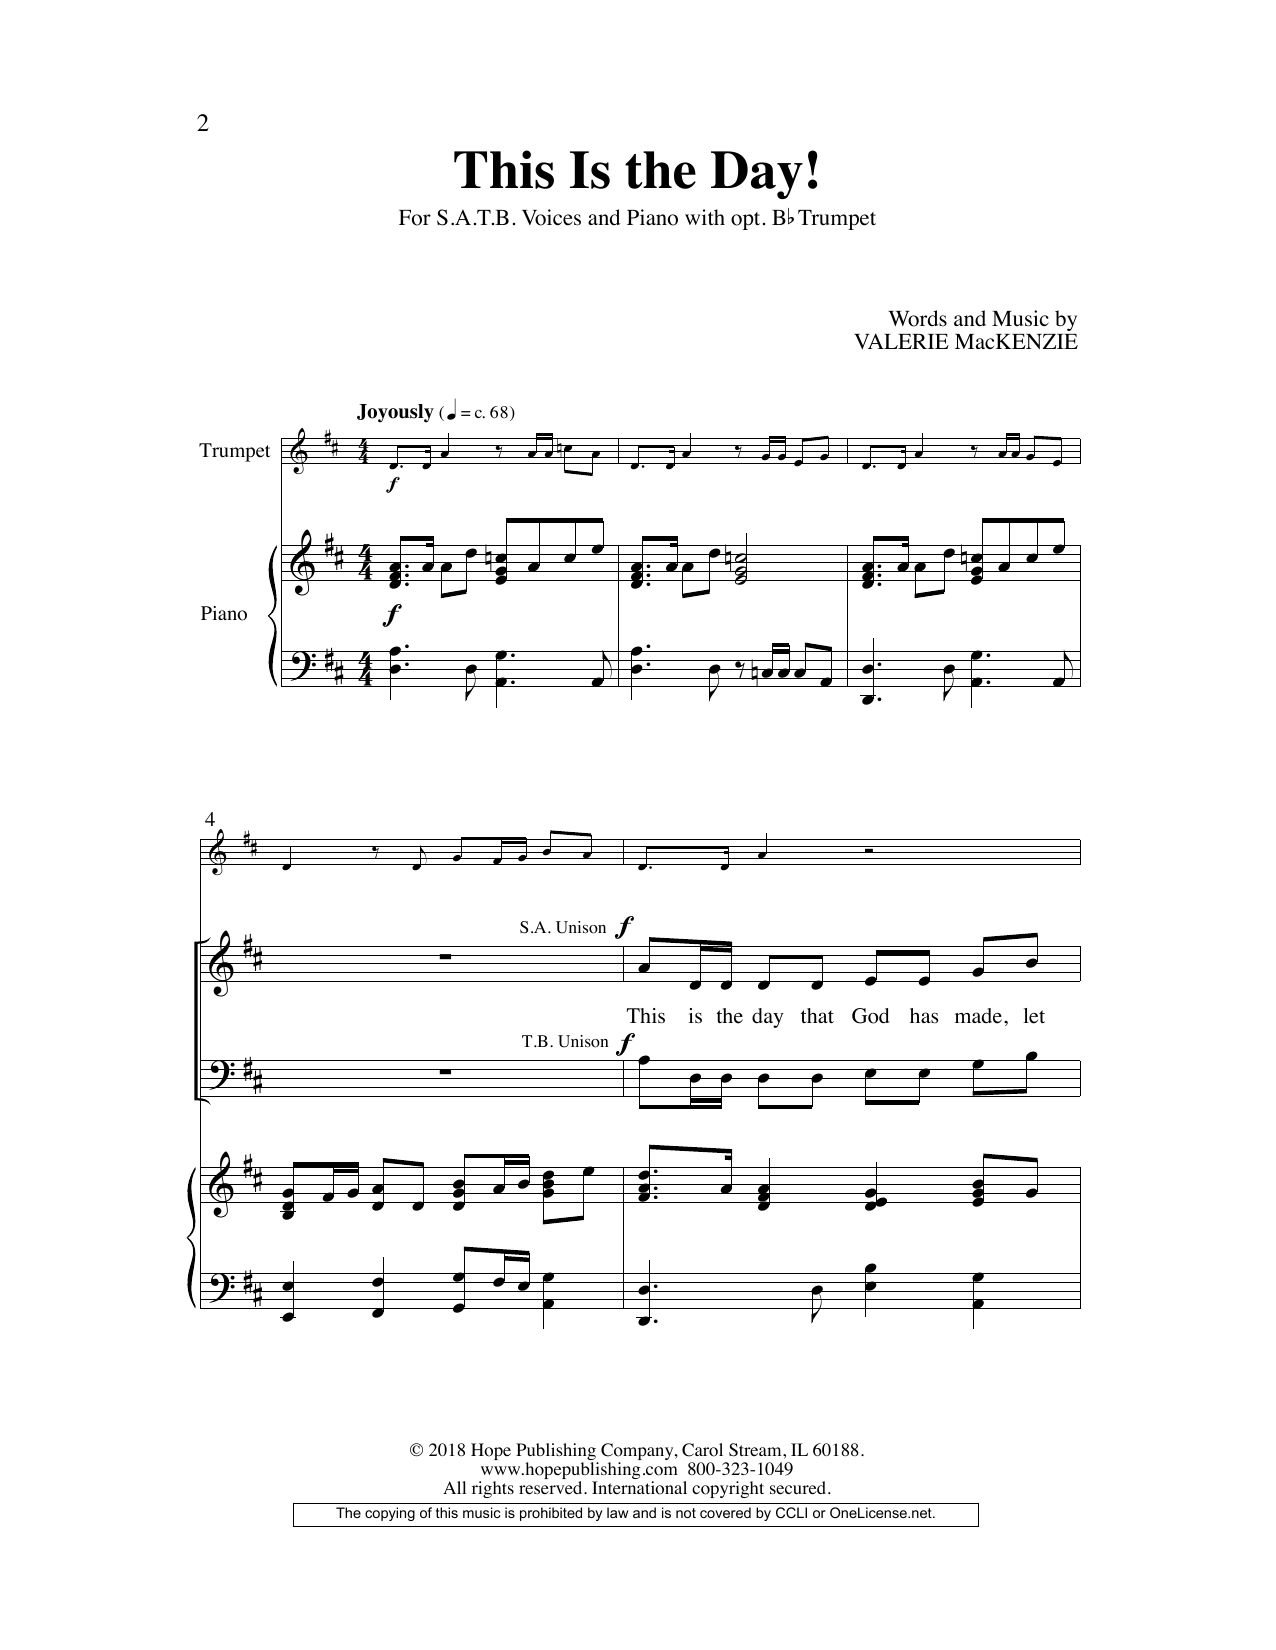 Download Valerie MacKenzie This Is the Day! Sheet Music